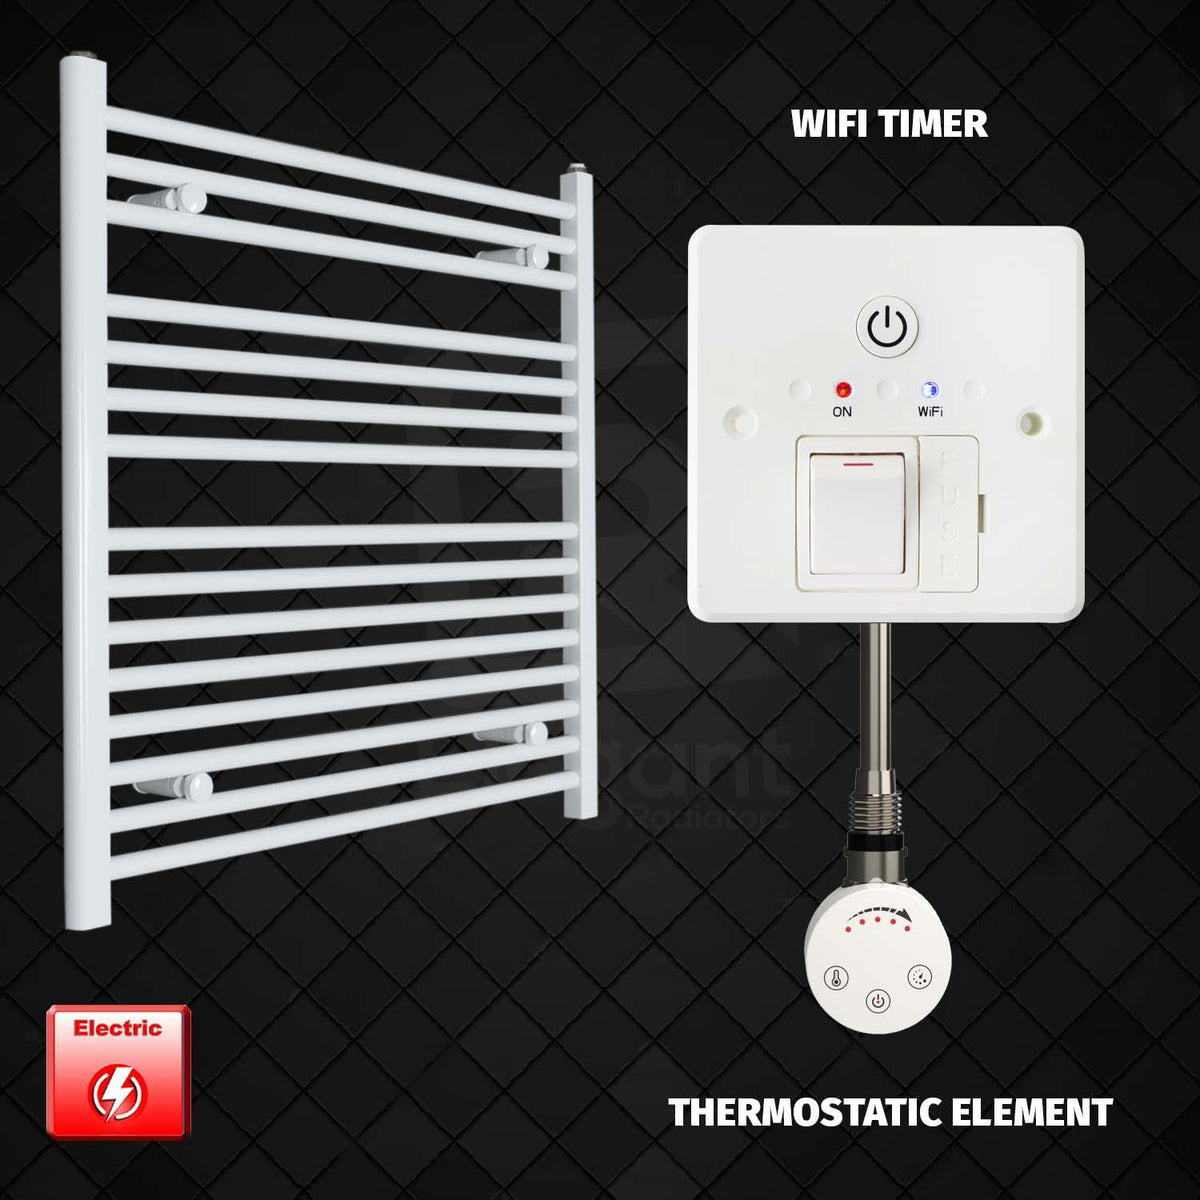 800 mm High 750 mm Wide Pre-Filled Electric Heated Towel Rail Radiator White HTR SMR Thermostatic element Wifi timer